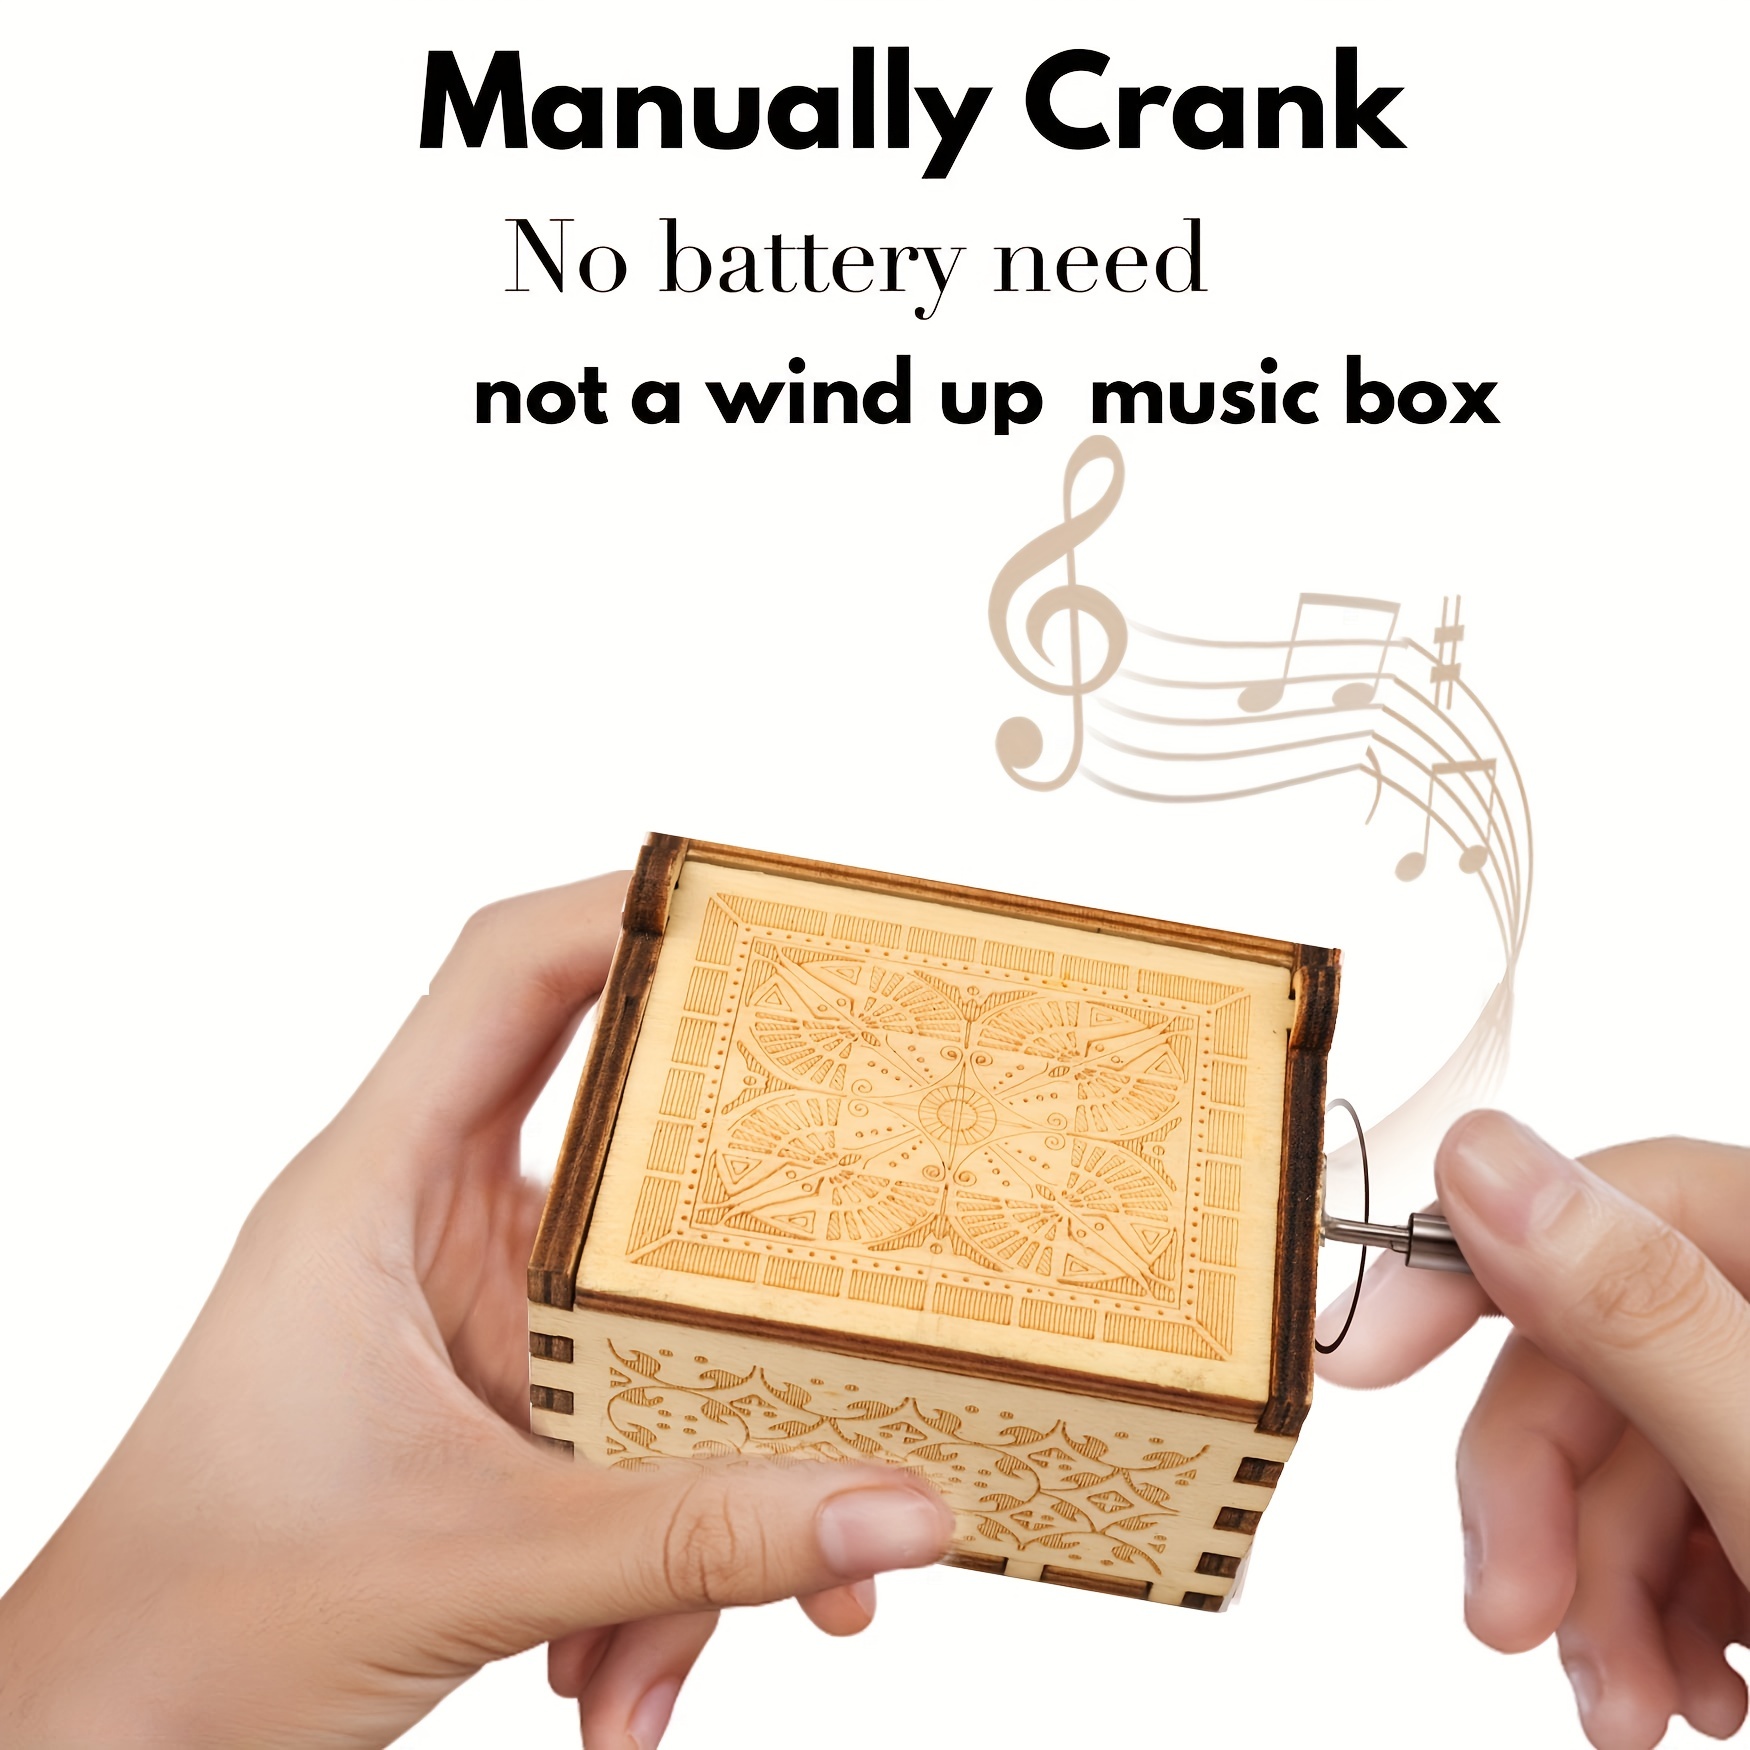 Mi*AngMax Legend of Zelda Theme Wooden Music Box - Antique Engraved Musical Boxes Case for Wooden Zelda Gifts - Wedding Valentine Christmas Musical